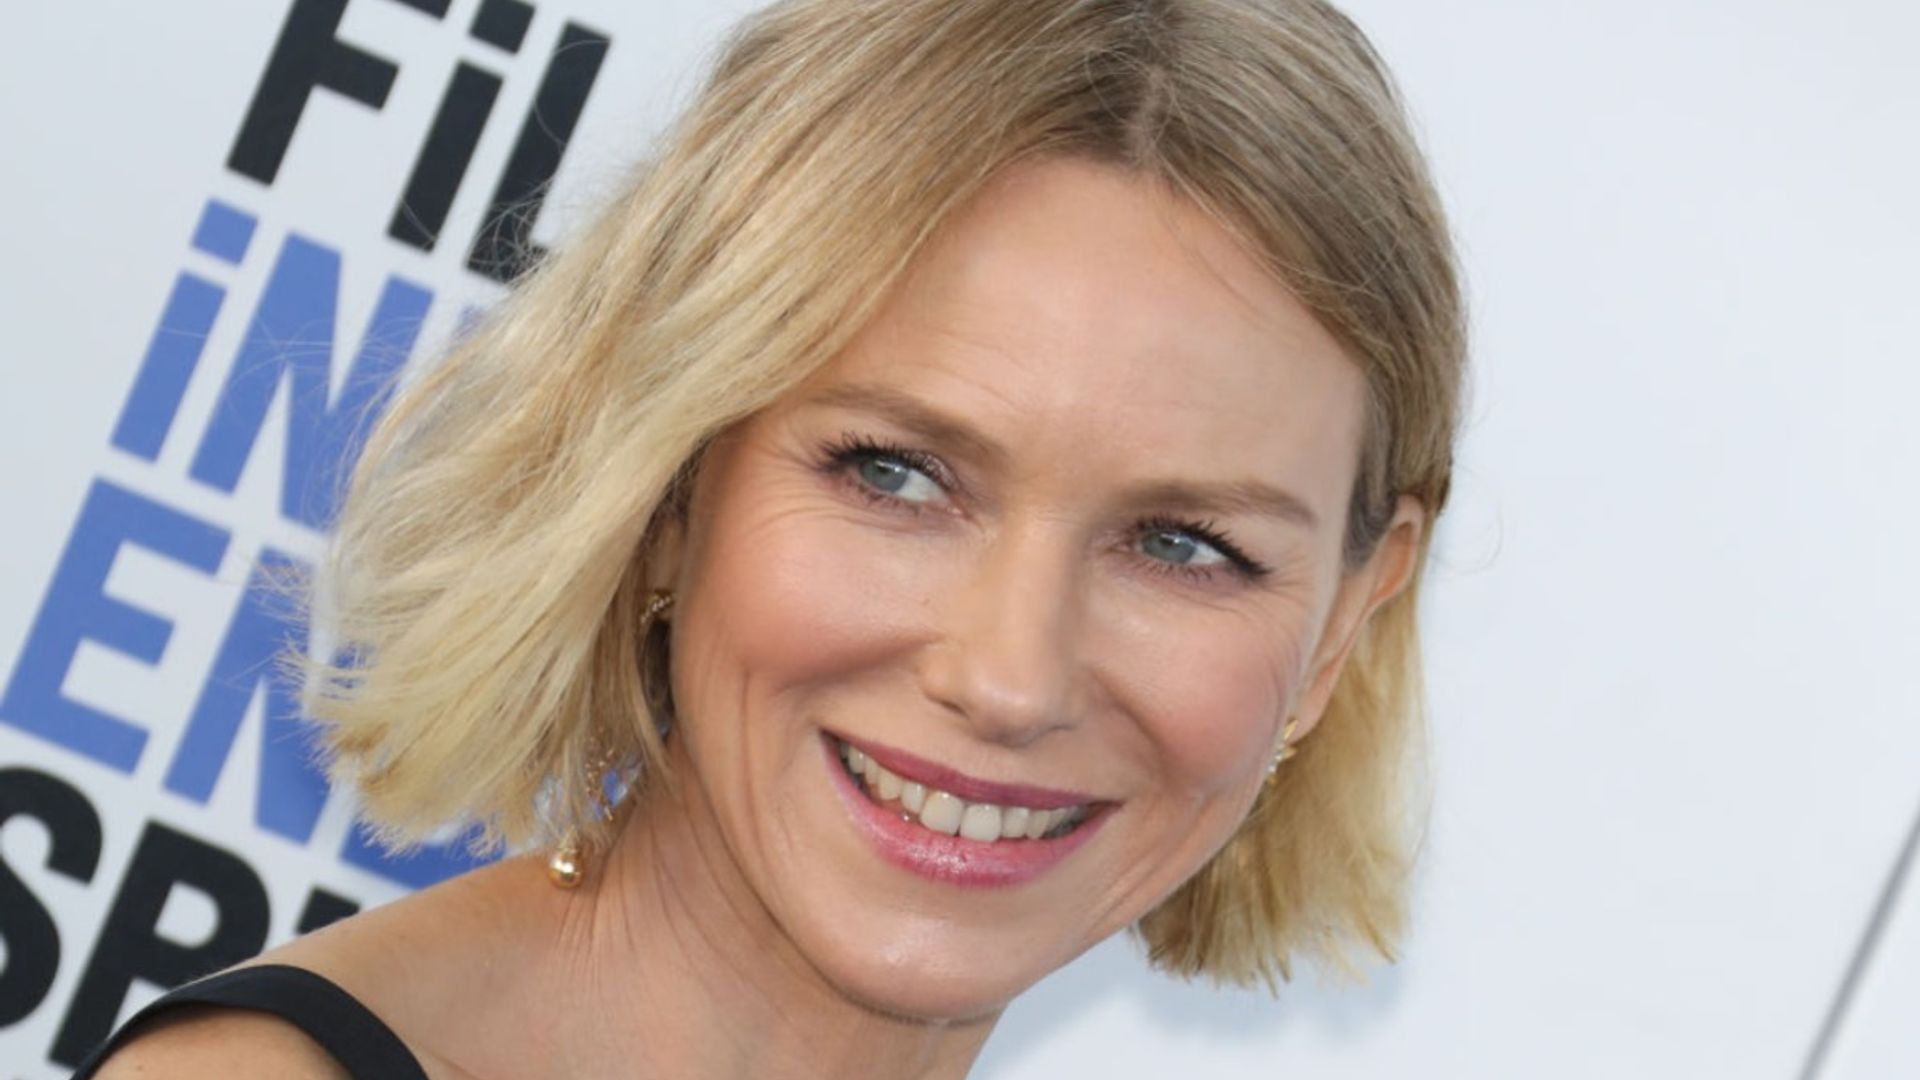 Naomi Watts is unrecognisable after using face filters on Instagram